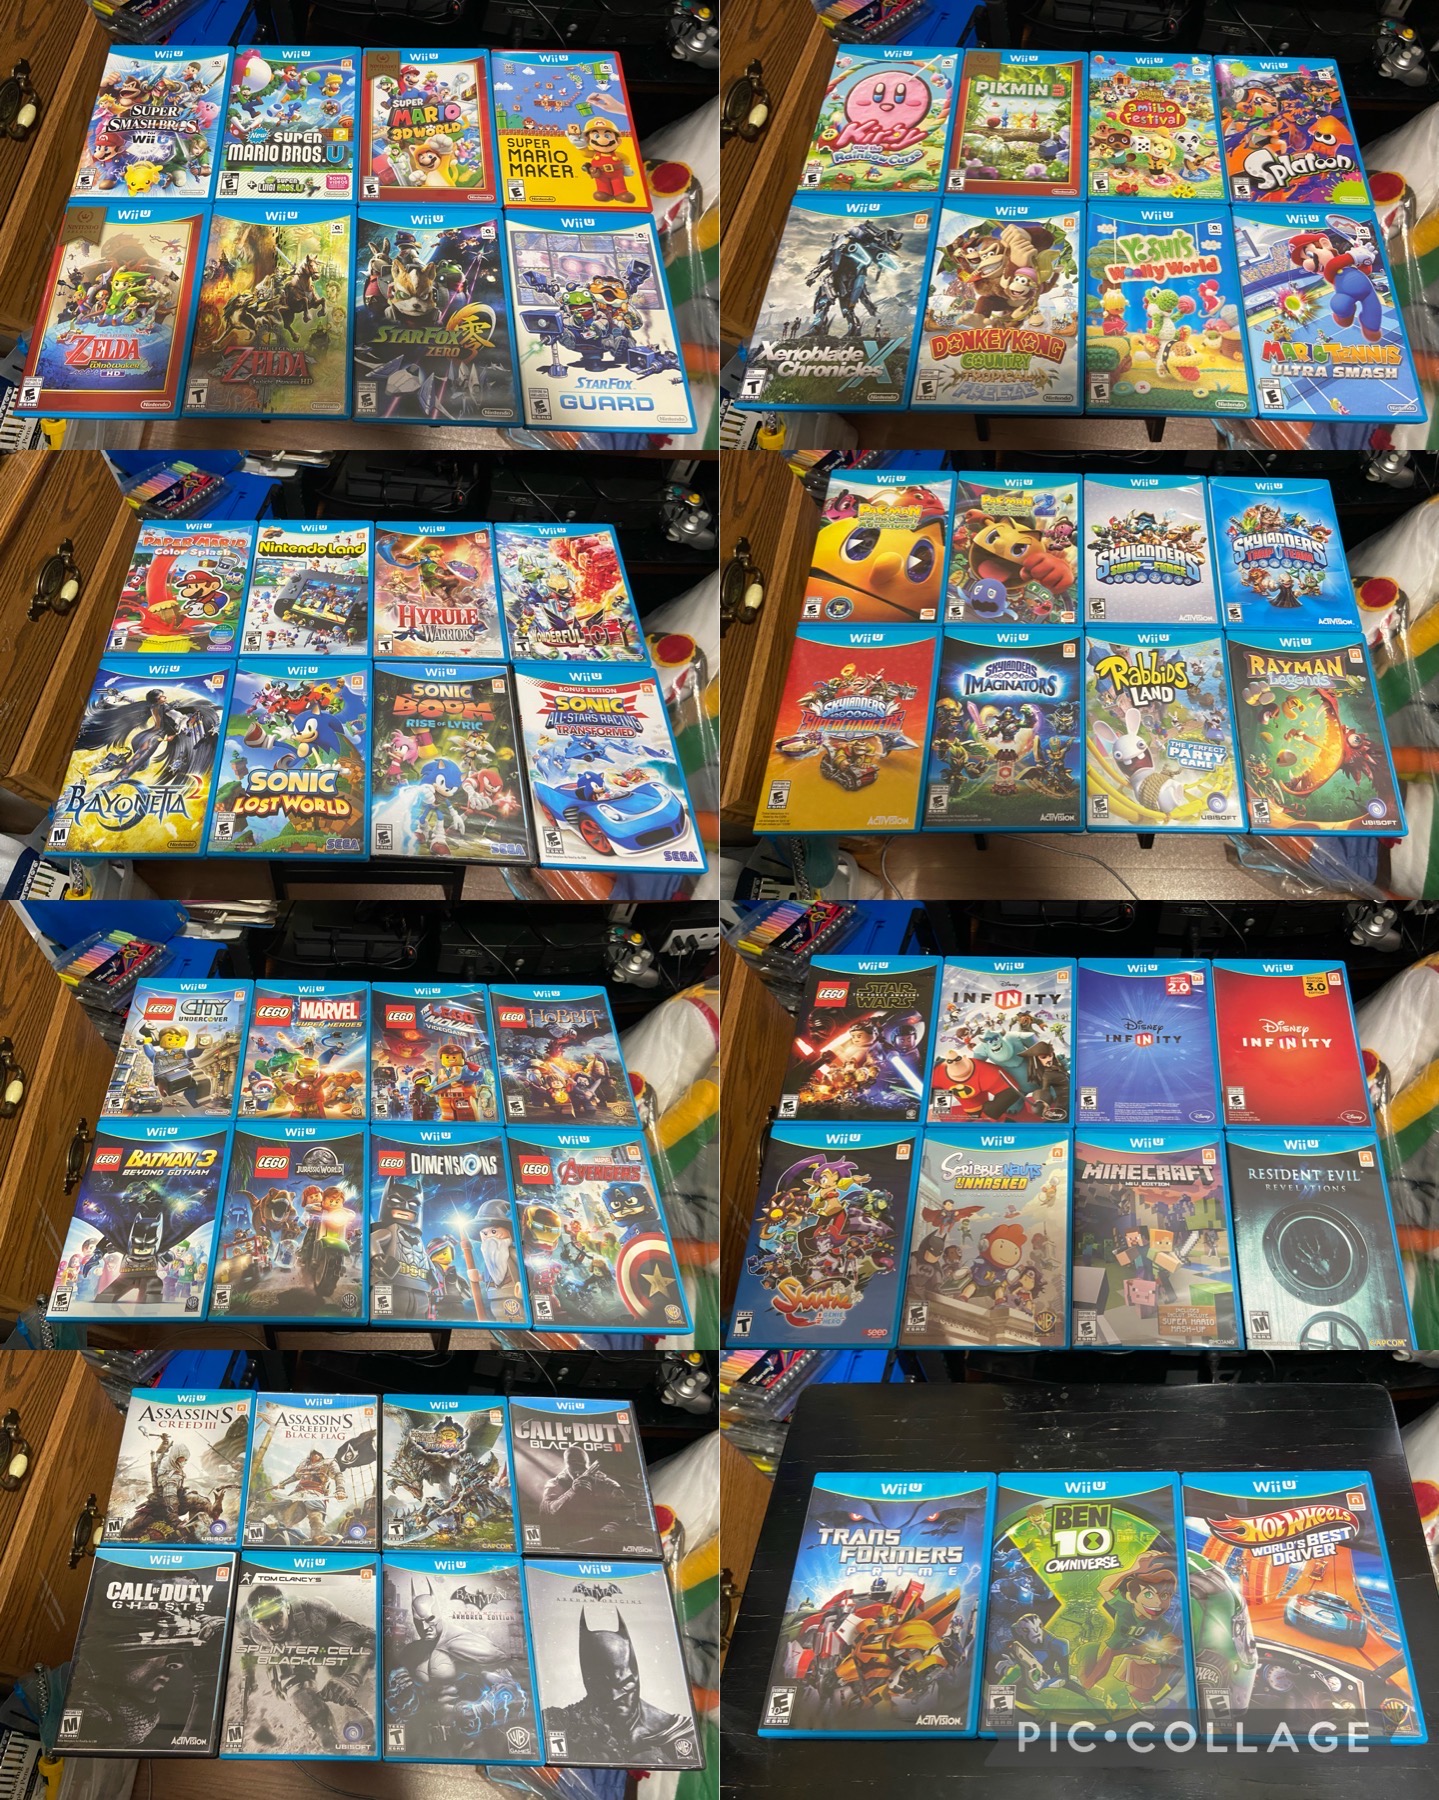 My Wii U collection by zoomMF2005 on DeviantArt